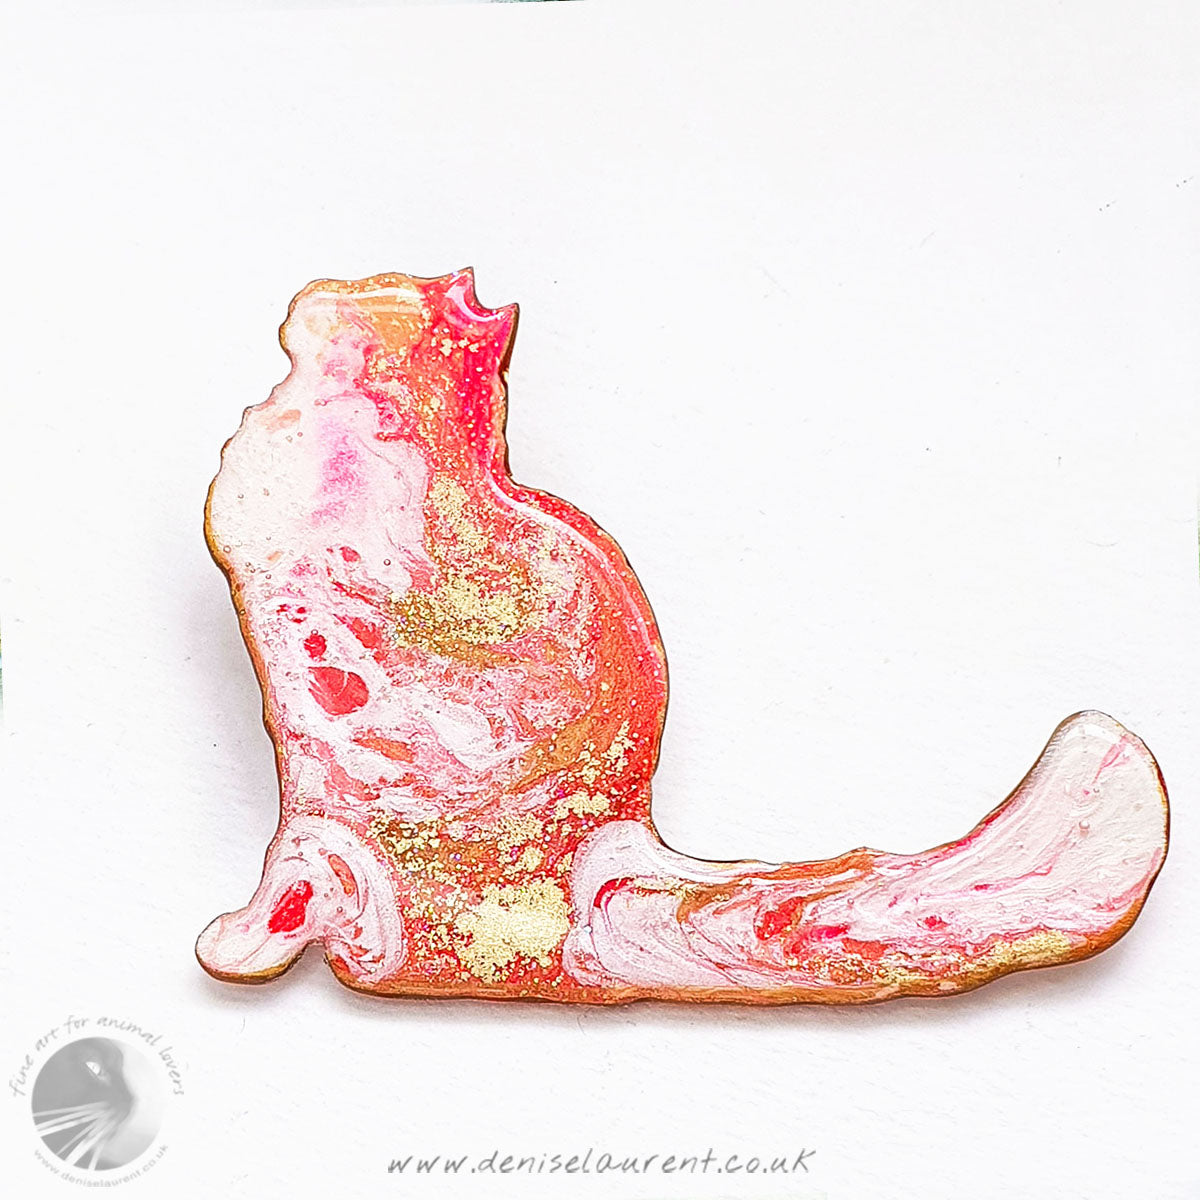 Longhaired Cat Brooch - Pink Poppy